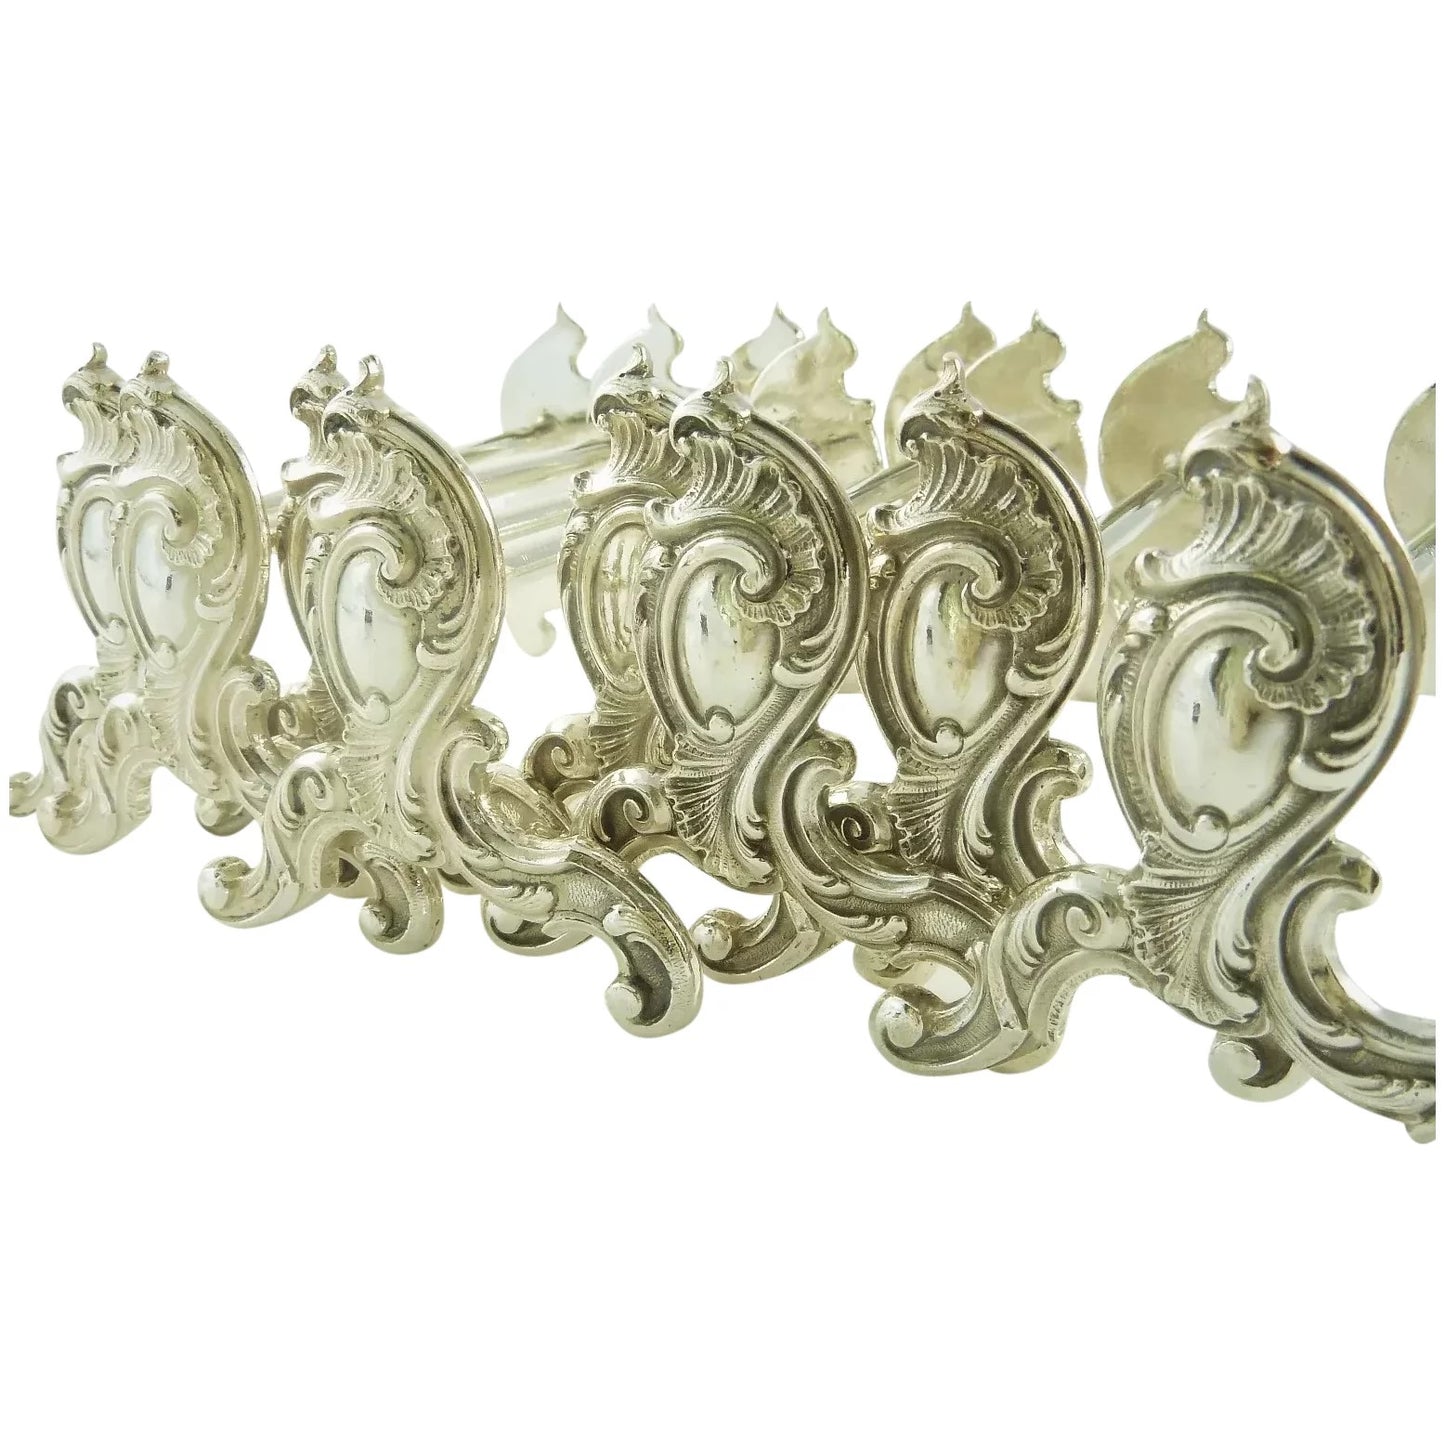 French Silver Plate Dinner Knife Rests Set of Eight, Louis XV Style - 43 Chesapeake Court Antiques